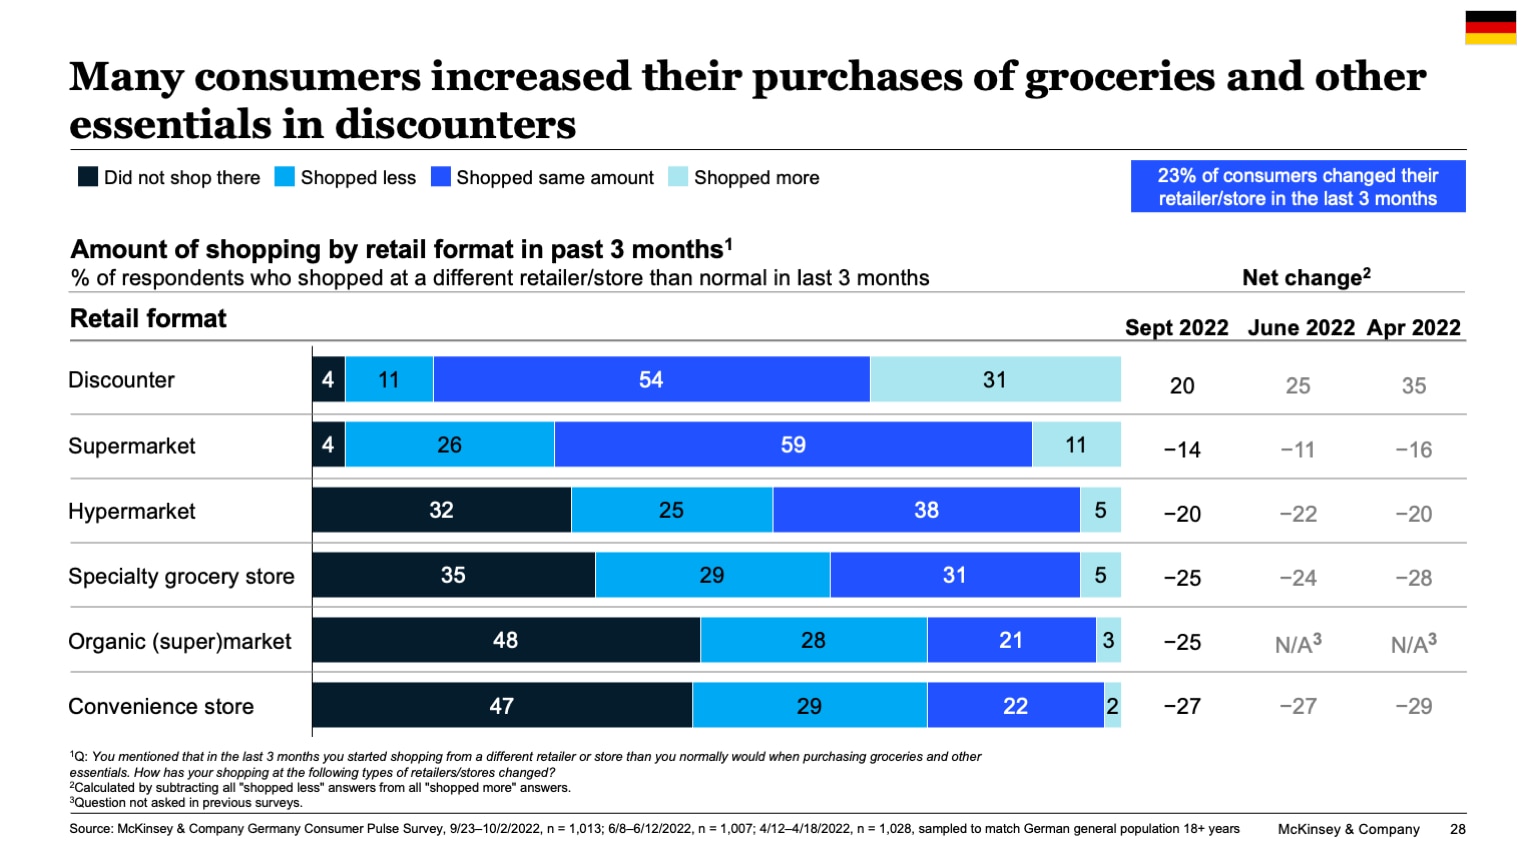 Many consumers increased their purchases of groceries and other essentials in discounters